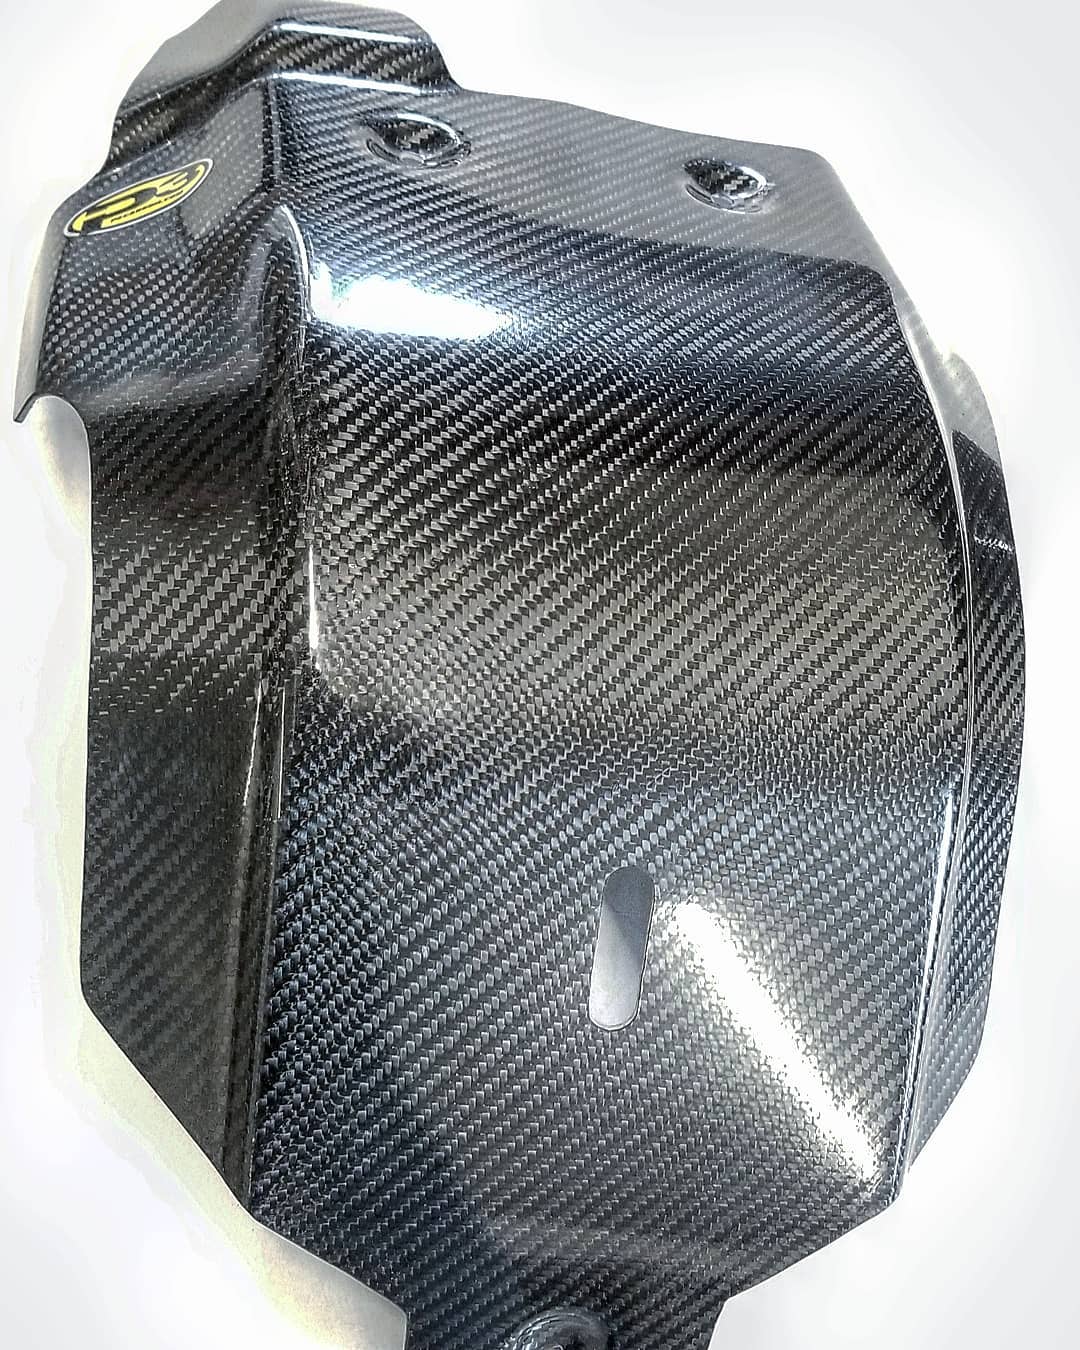 Main image of P3 Carbon Skid Plate Yamaha WR/YZ 250/450 F/FX 19-22